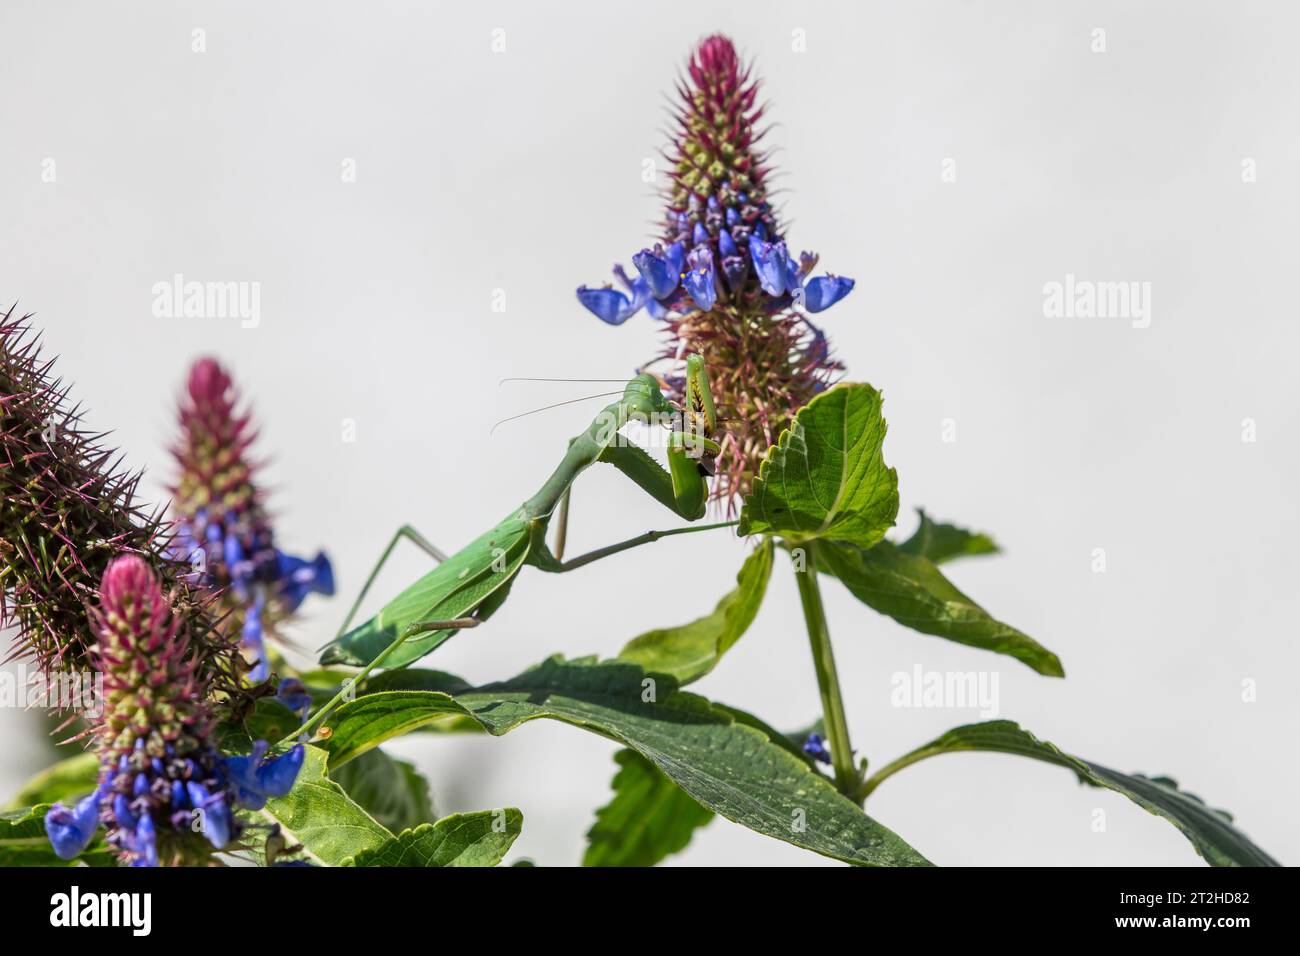 Praying Mantis eating a bee on a Blue Witches Hat plant (Pycnostachys urticifolia)  growing in a Southern California garden Stock Photo